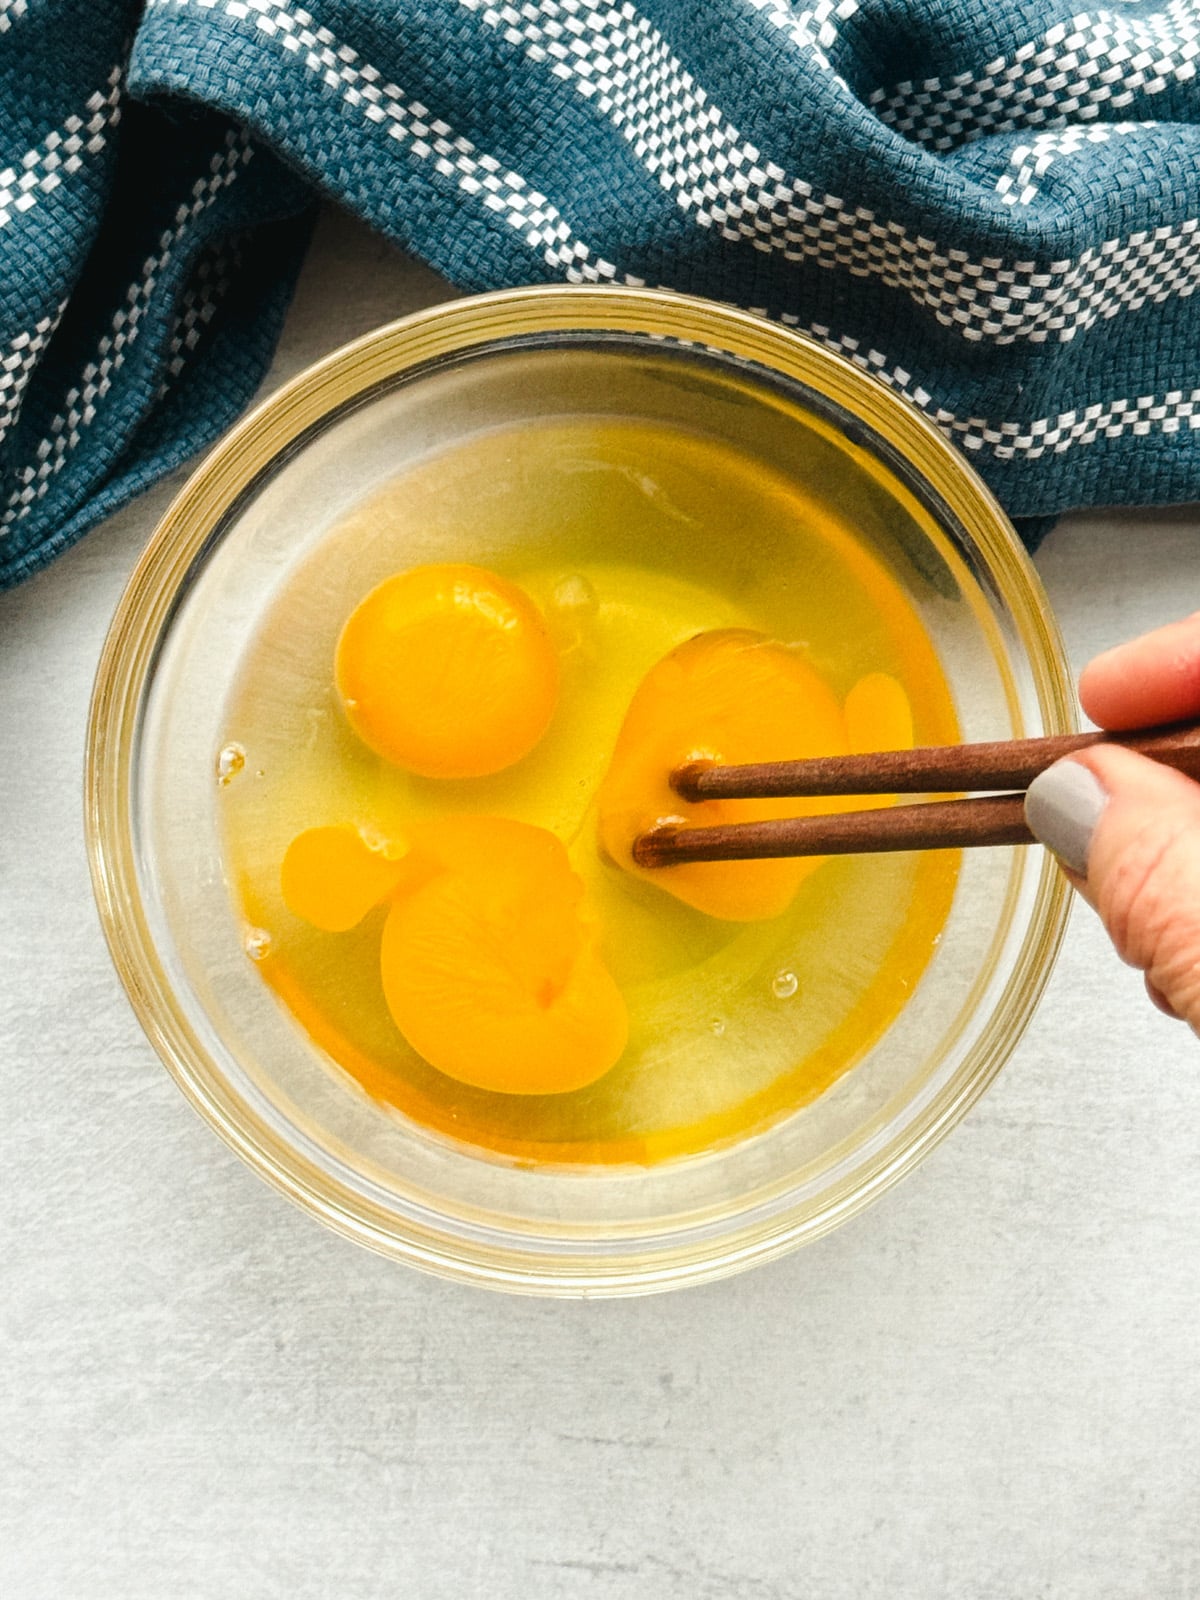 Three eggs in a glass bowl being stirred with chopsticks on top of a gray surface with a blue napkin on the side.